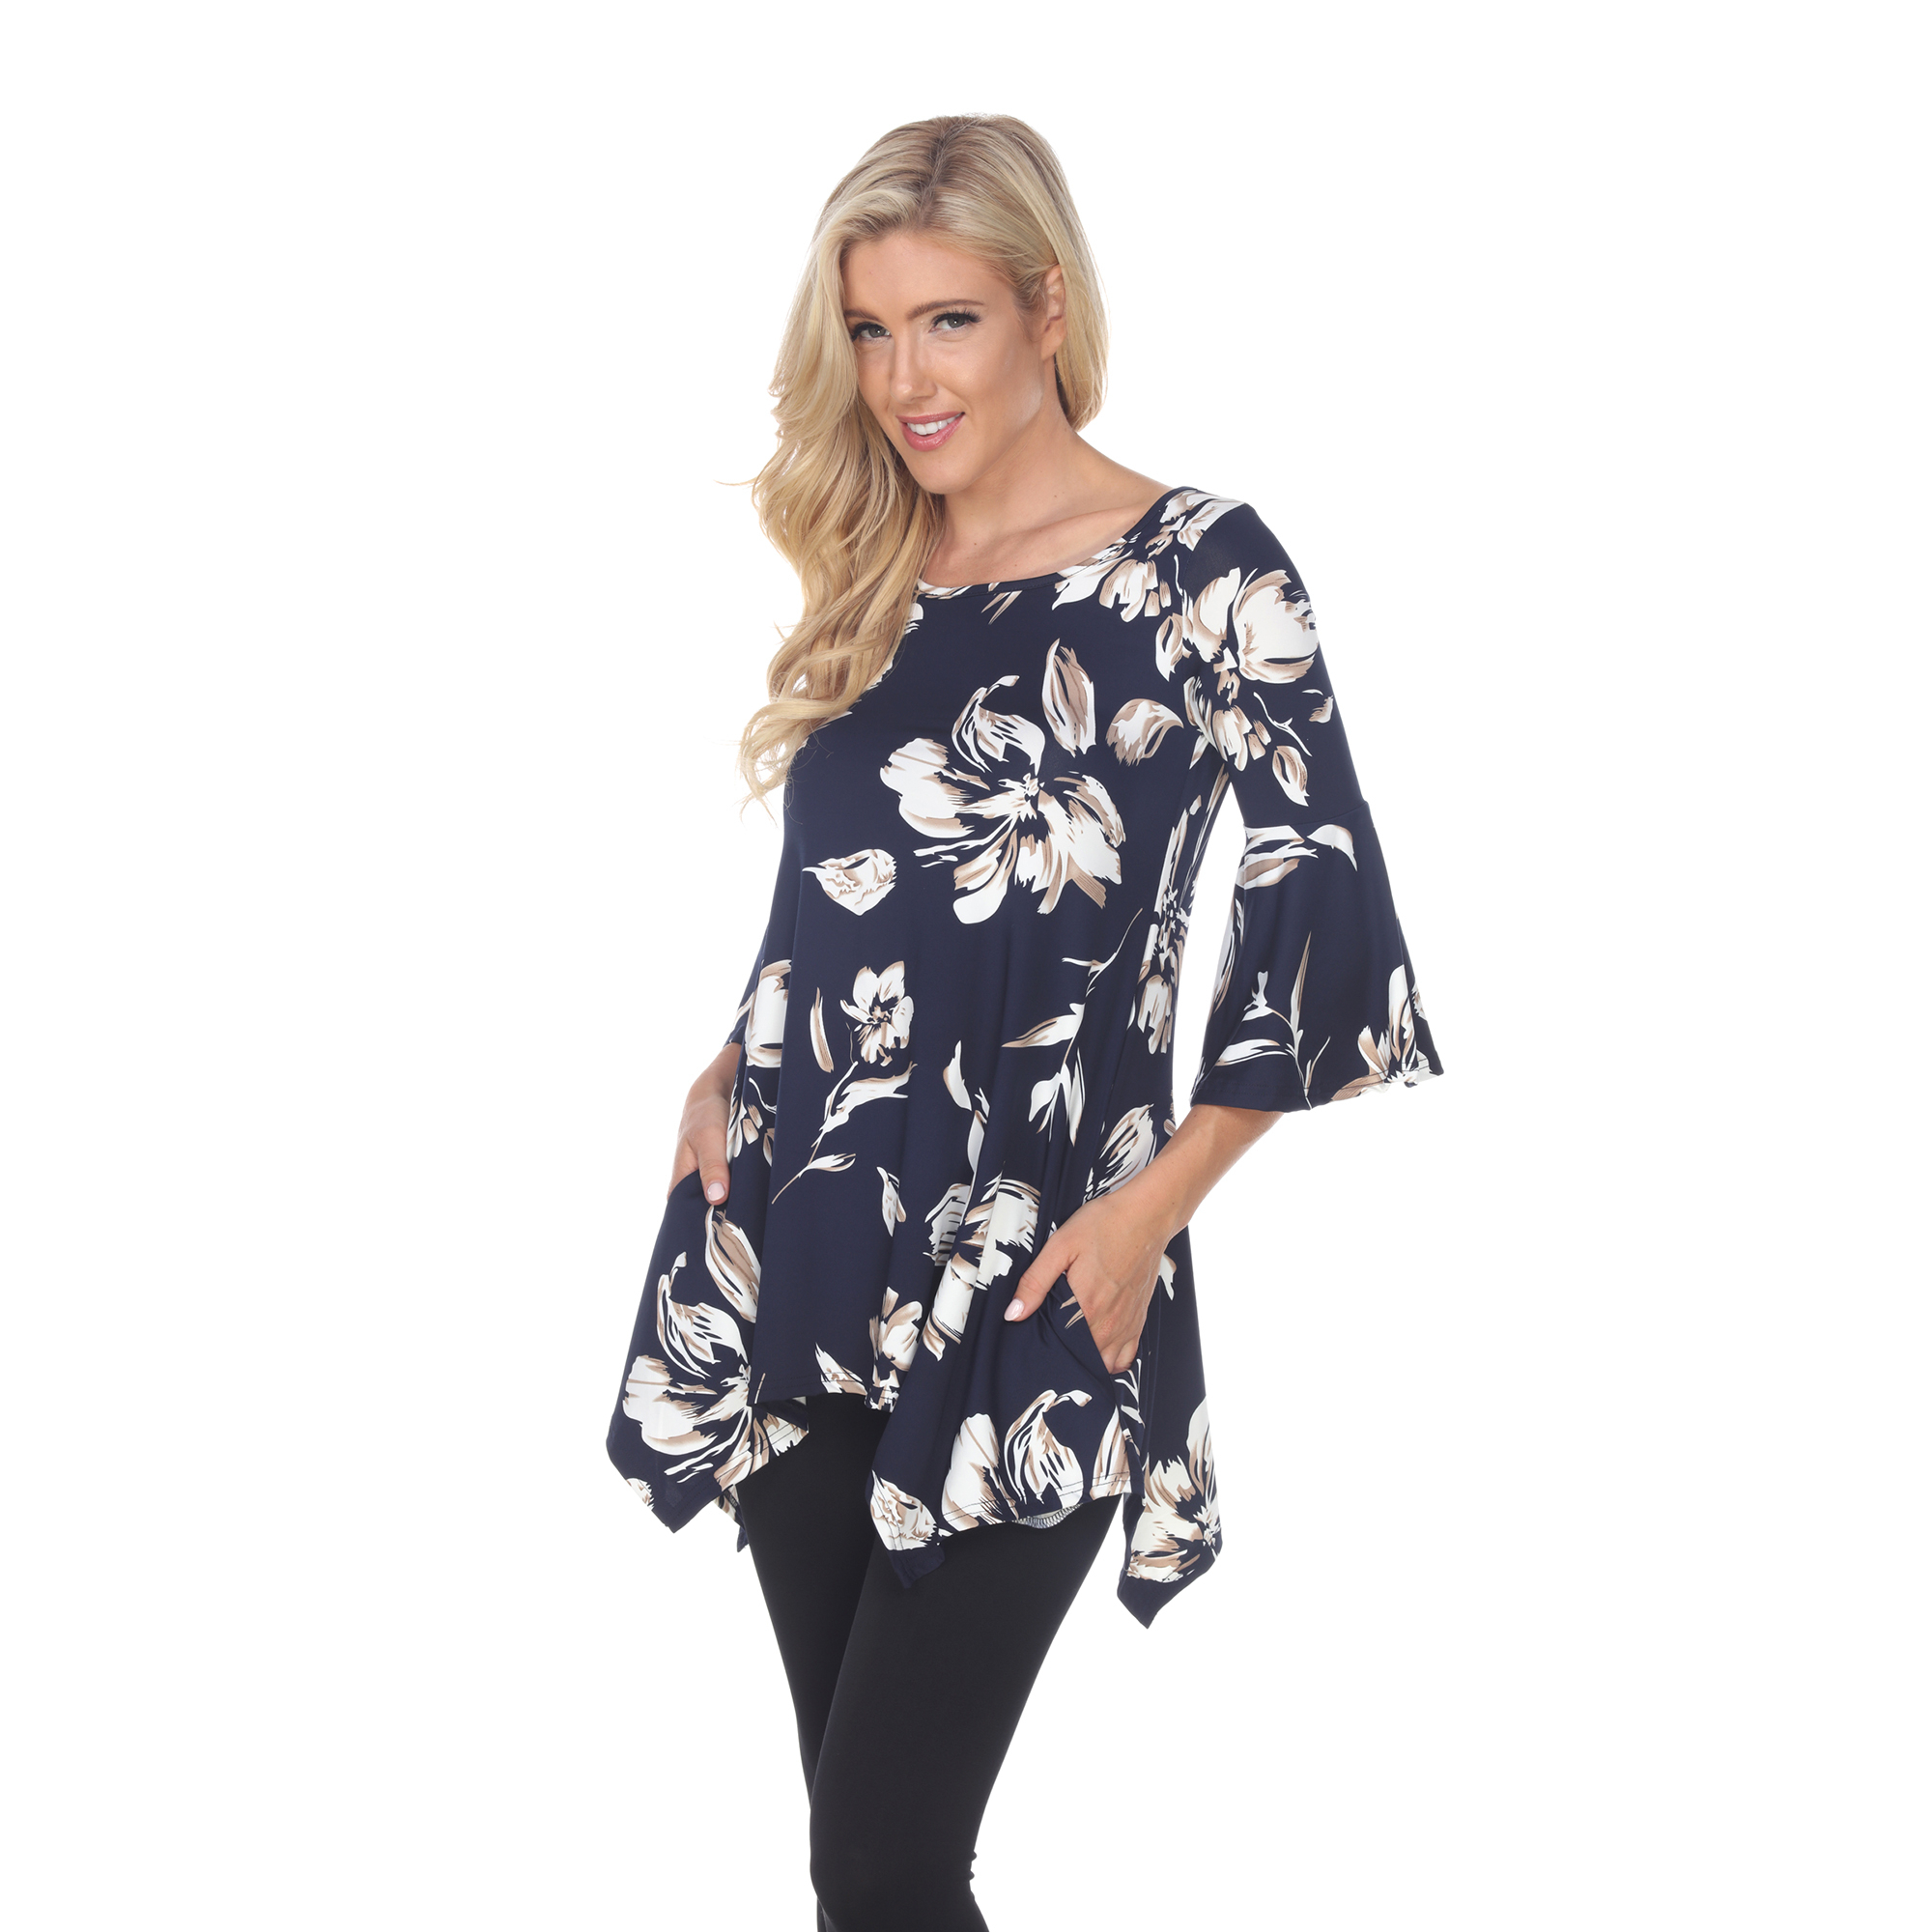 White Mark Women's Floral Print Quarter Sleeve Tunic Top With Pockets - Navy, 2X